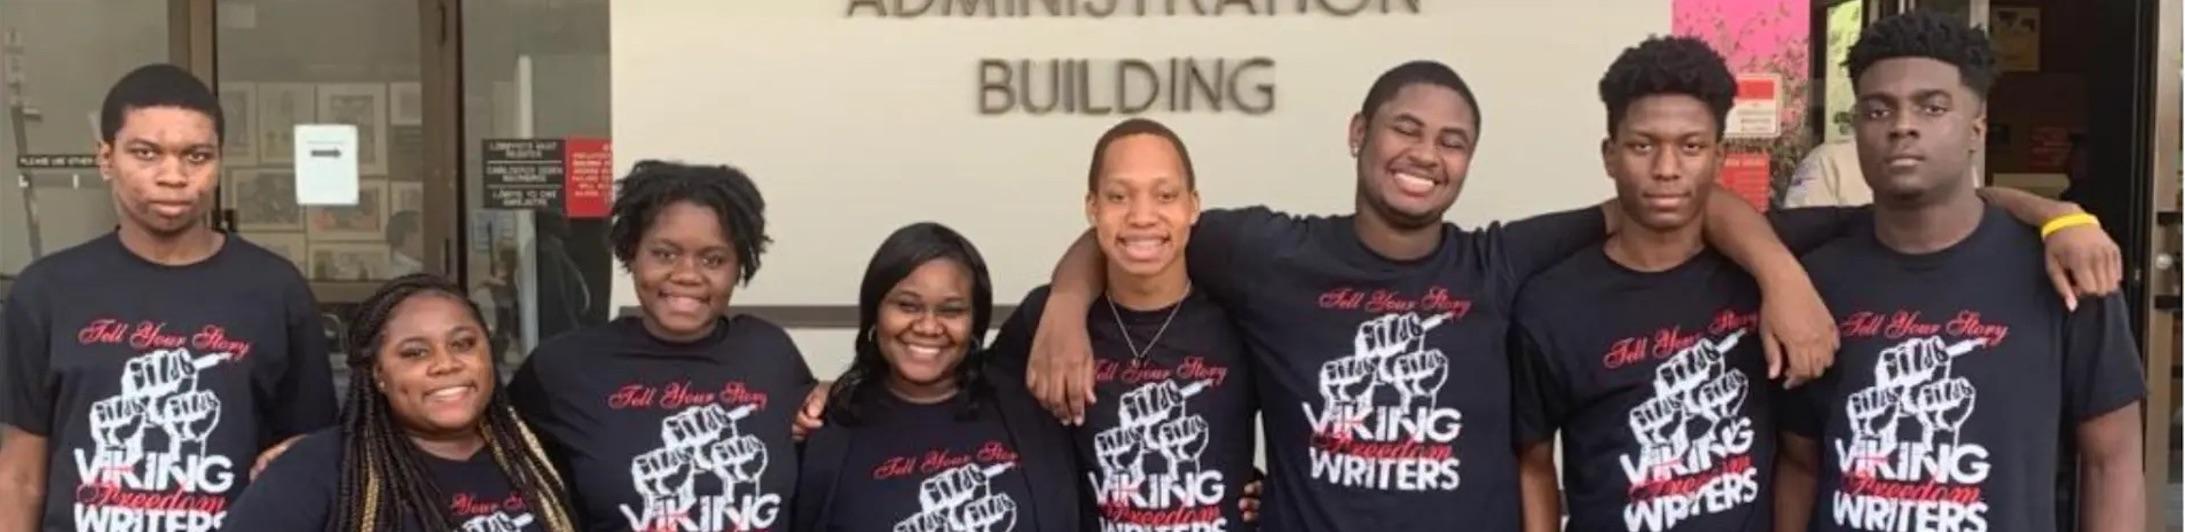 Dr. Symonette posing with several students all wearing shirts that say Viking Freedom Writers